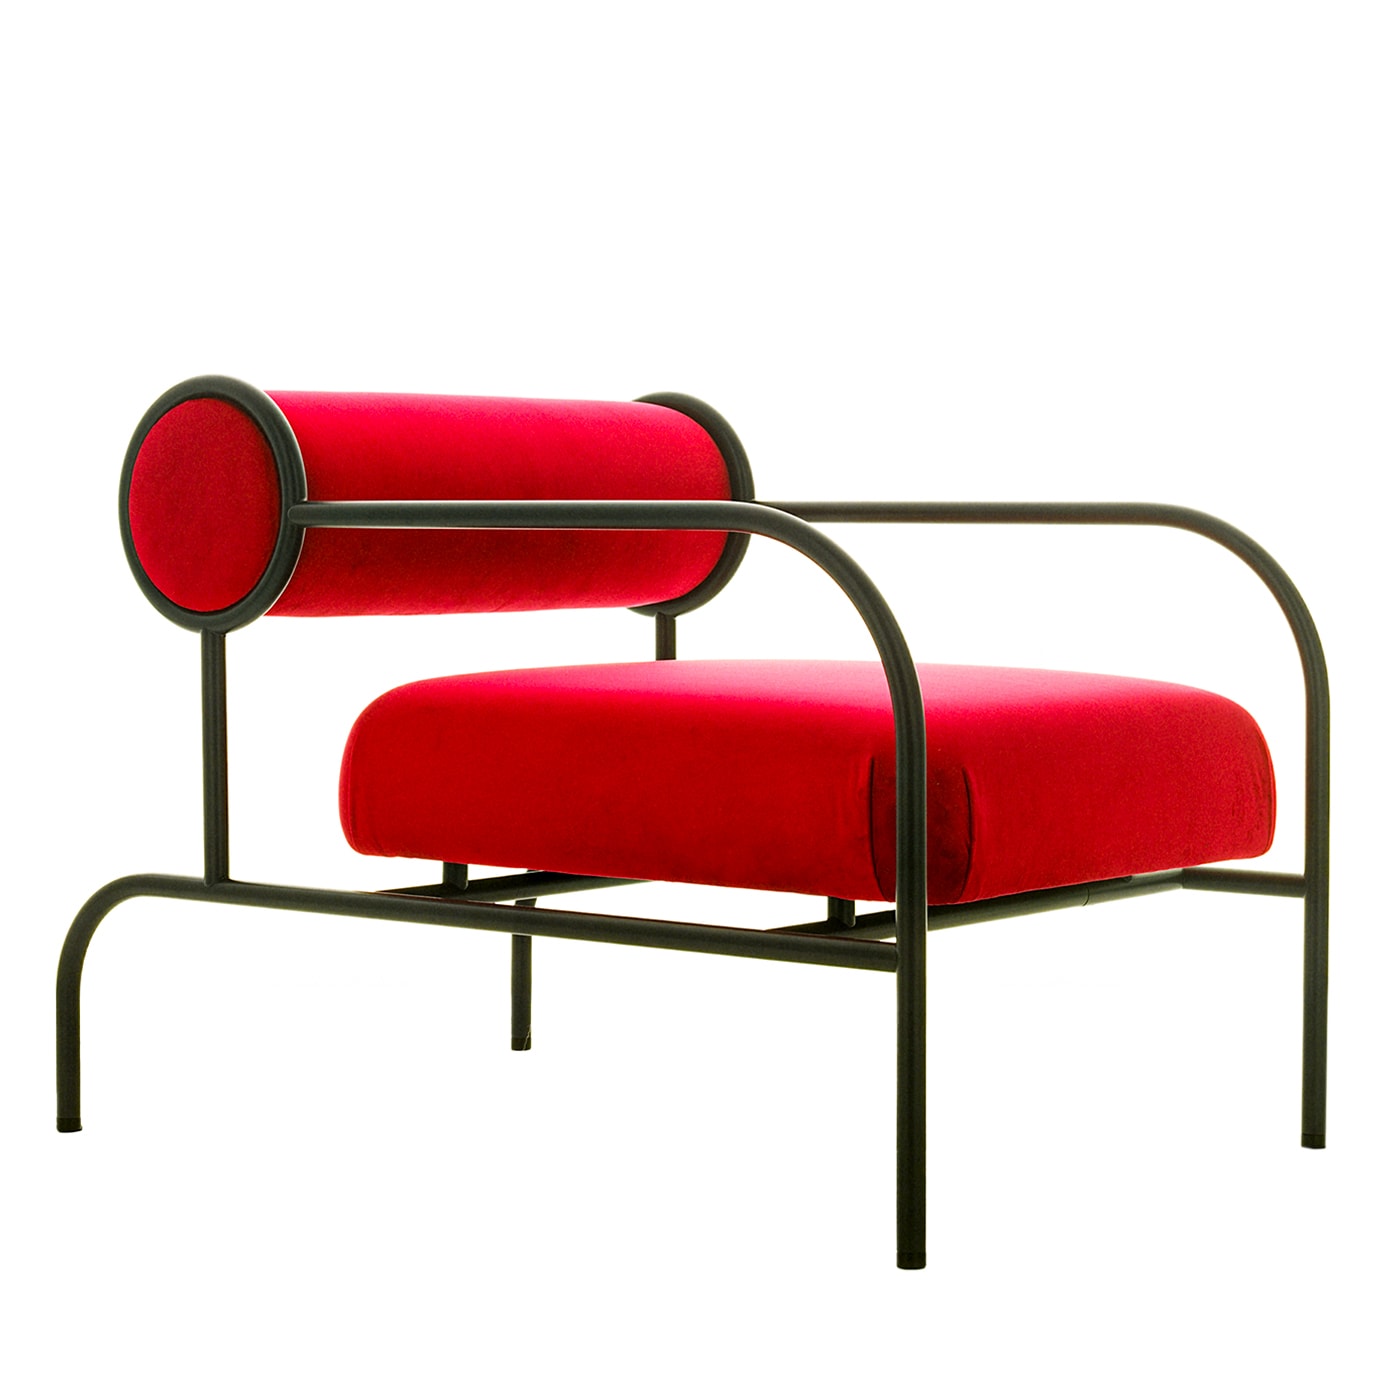 Red Sofa with Arms Black Limited Edition by Shiro Kuramata - Cappellini